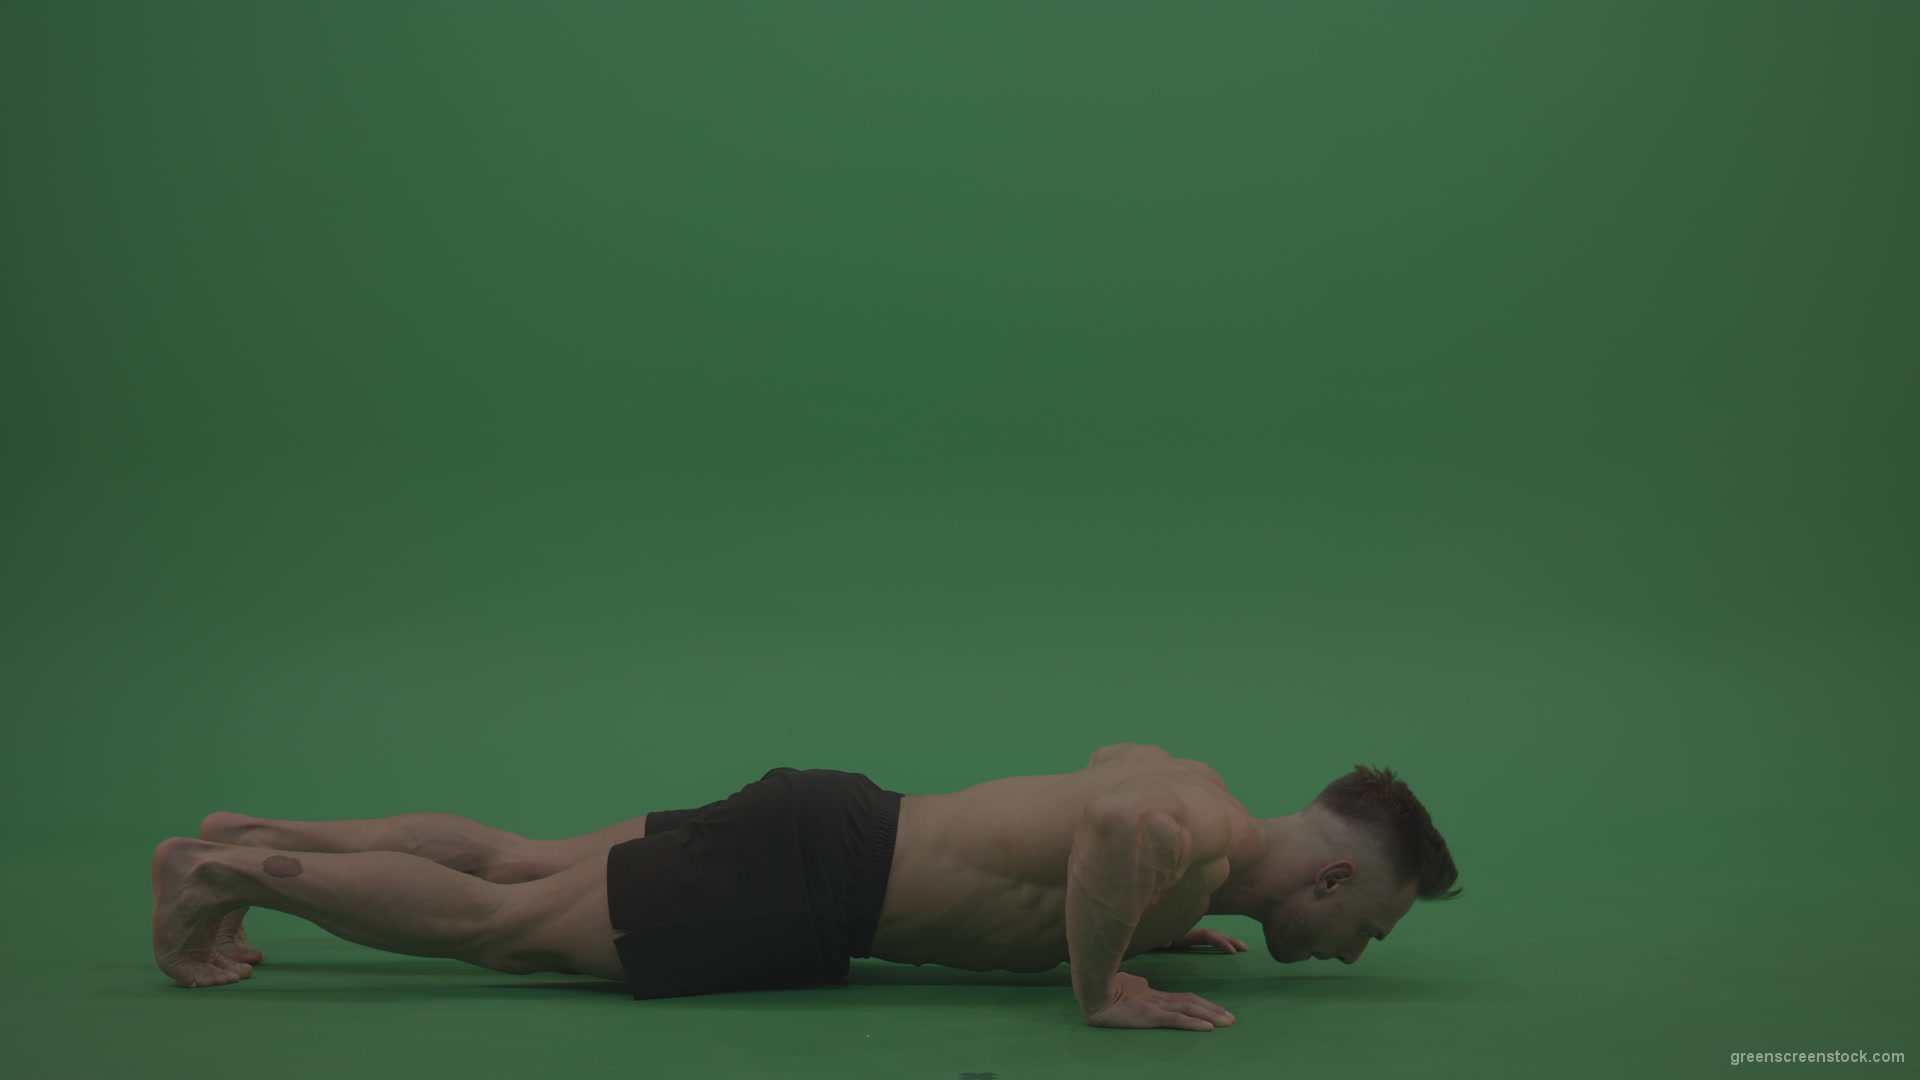 Young_Bodybuilder_Starts_Working_Out_From_Crouching_Terminator_Position_Does_Pull_Ups_Turns_Back_To_The_Start_Position_On_Green_Screen_Wall_Background_007 Green Screen Stock